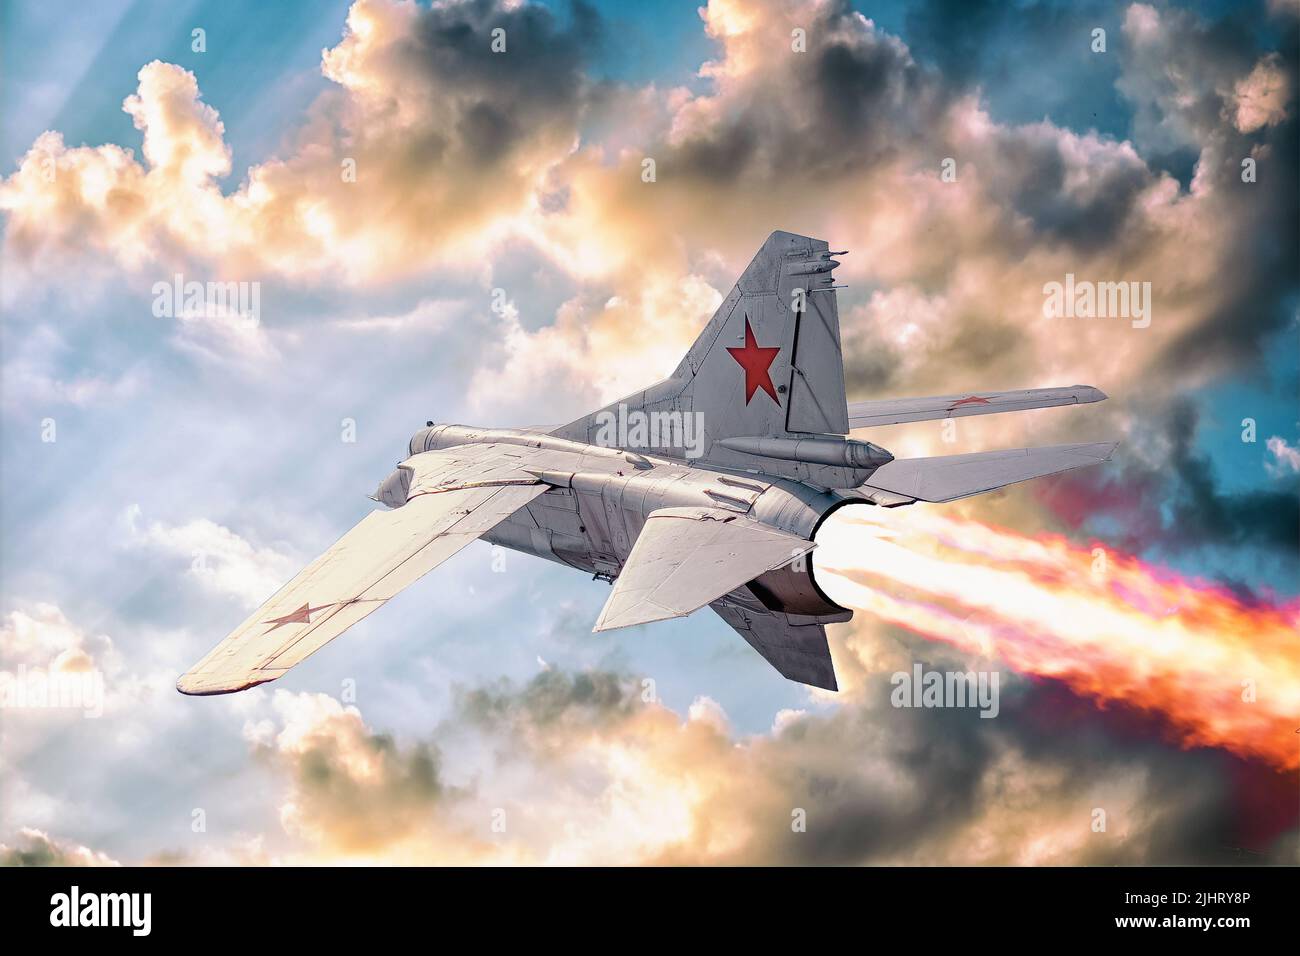 Mikoyan-Gurevich MiG-23 MLD Flogger-K plane in a cloudy sky, collage. MIG 23 was produced in USSR in 1967–1985. Stock Photo